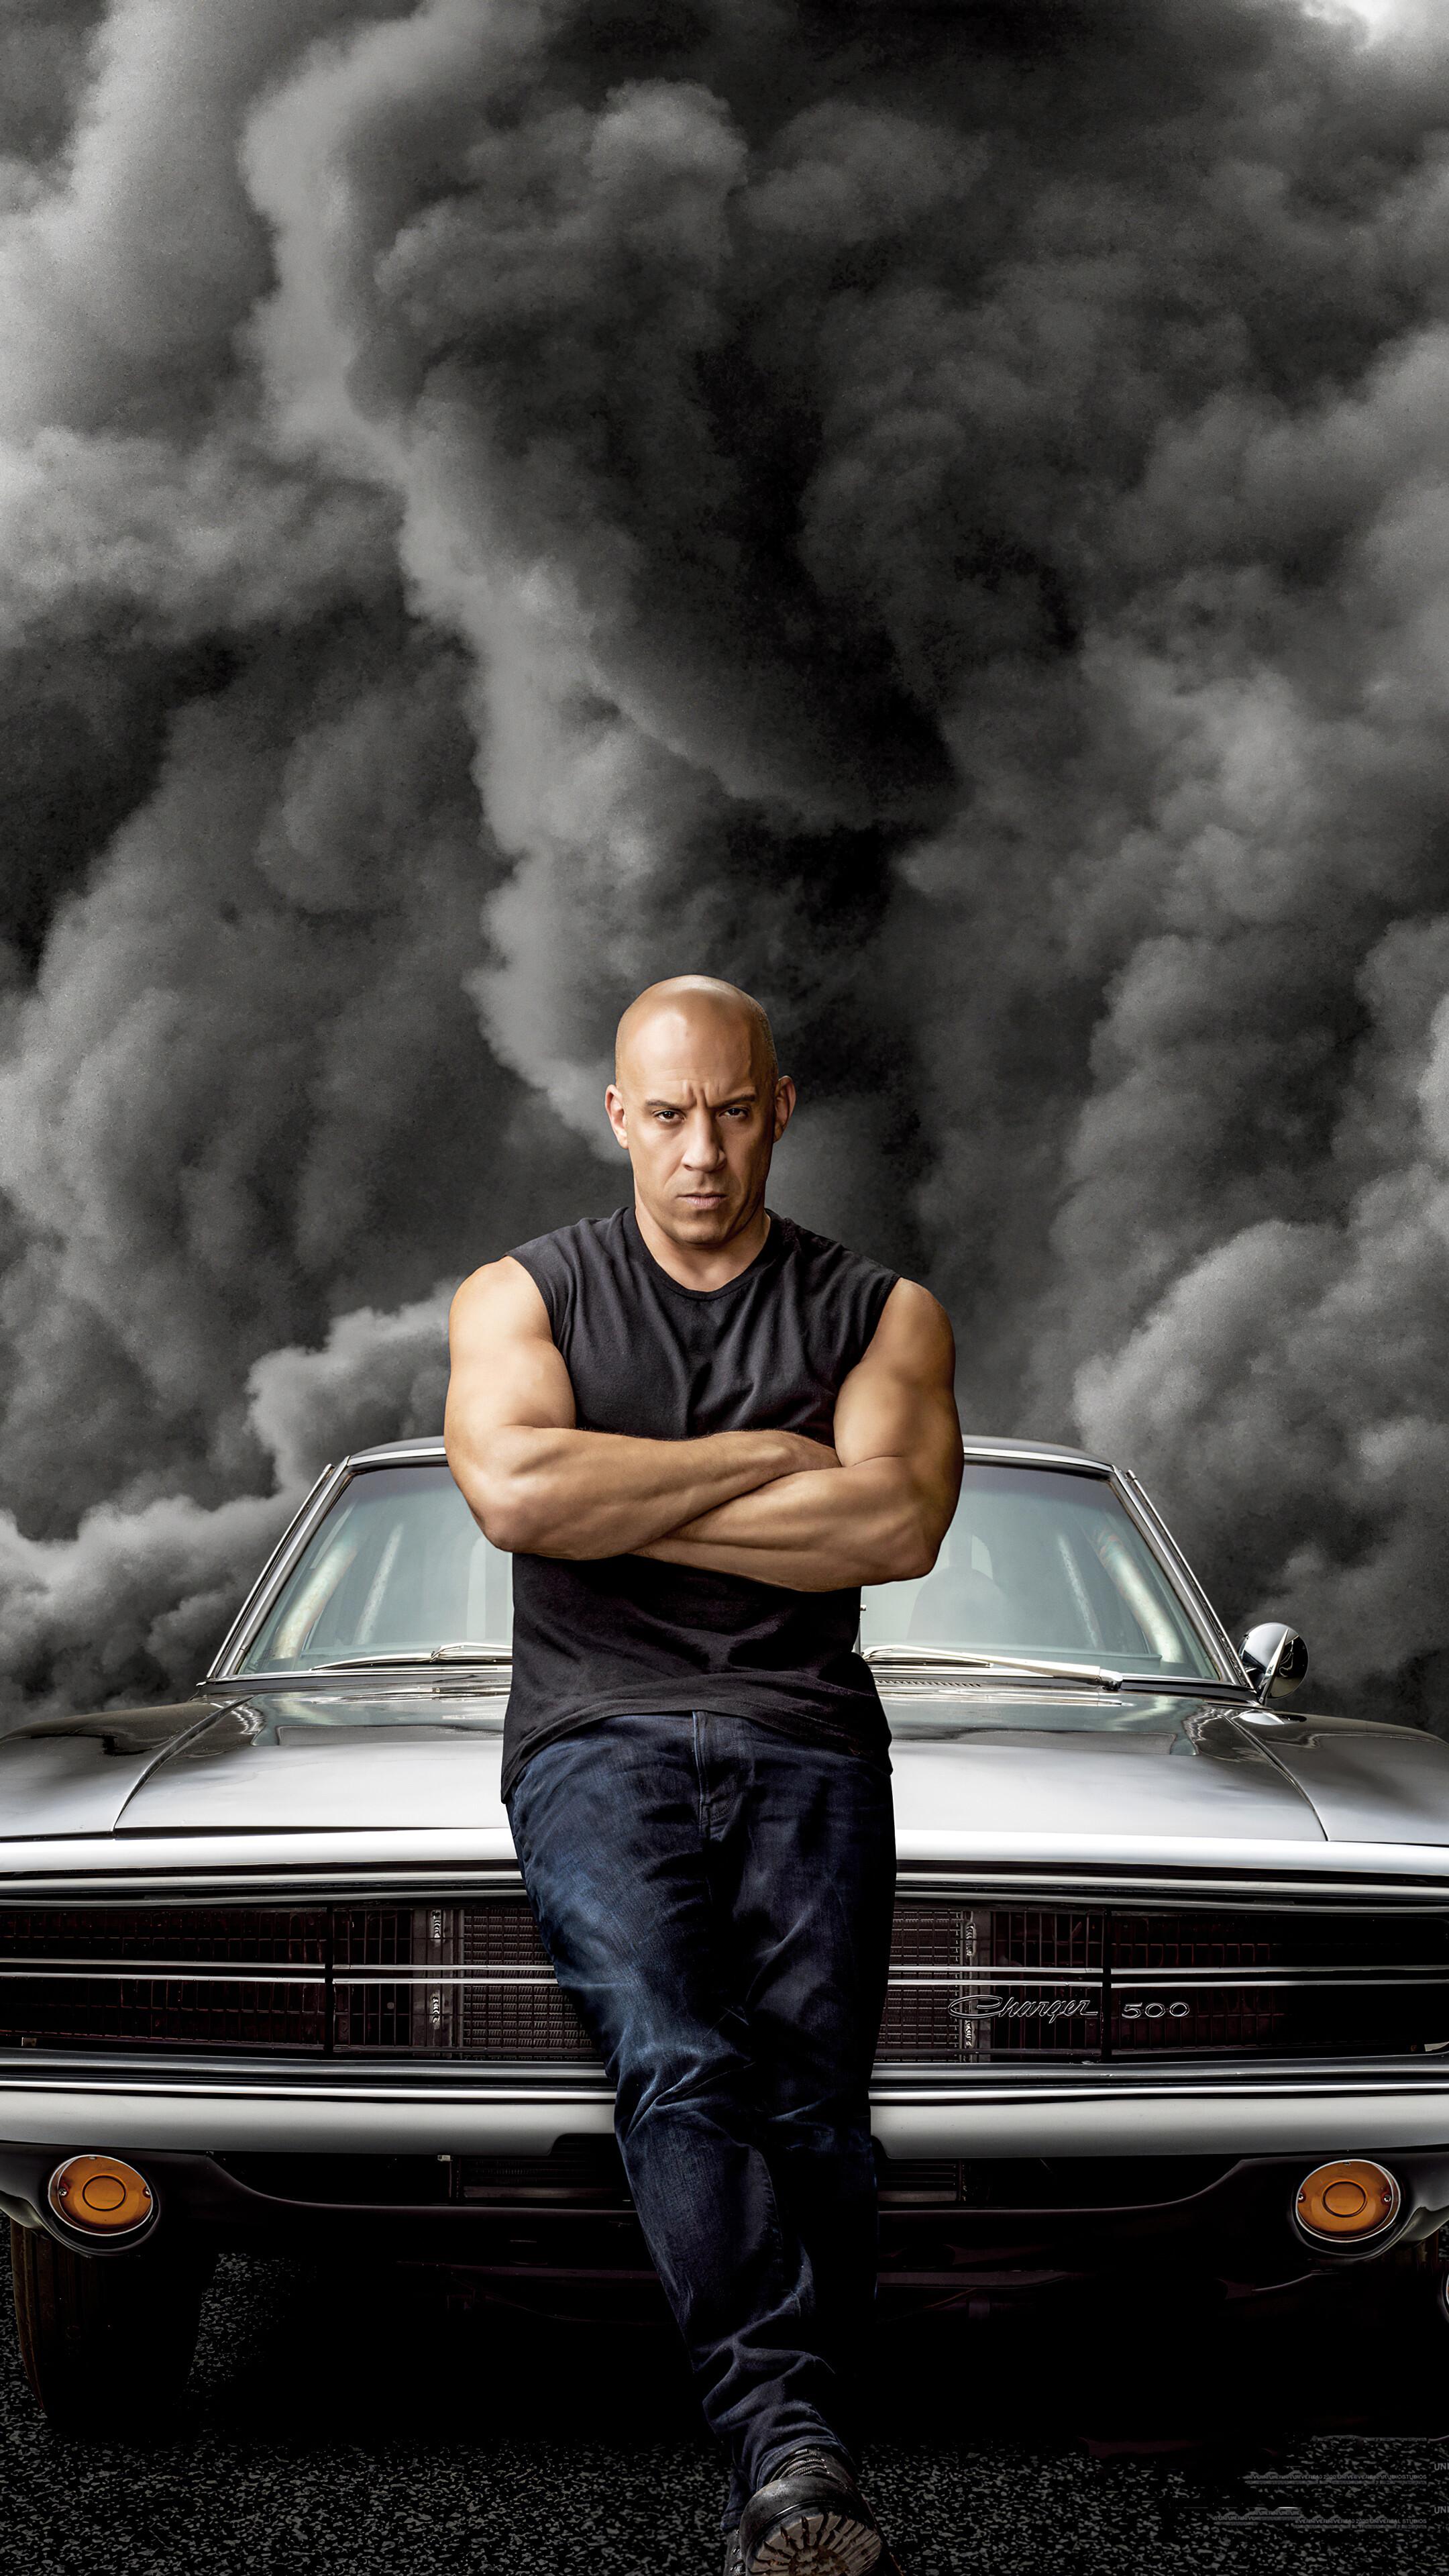 323100 Fast and Furious 9 Dominic Toretto Poster Vin Diesel 4k